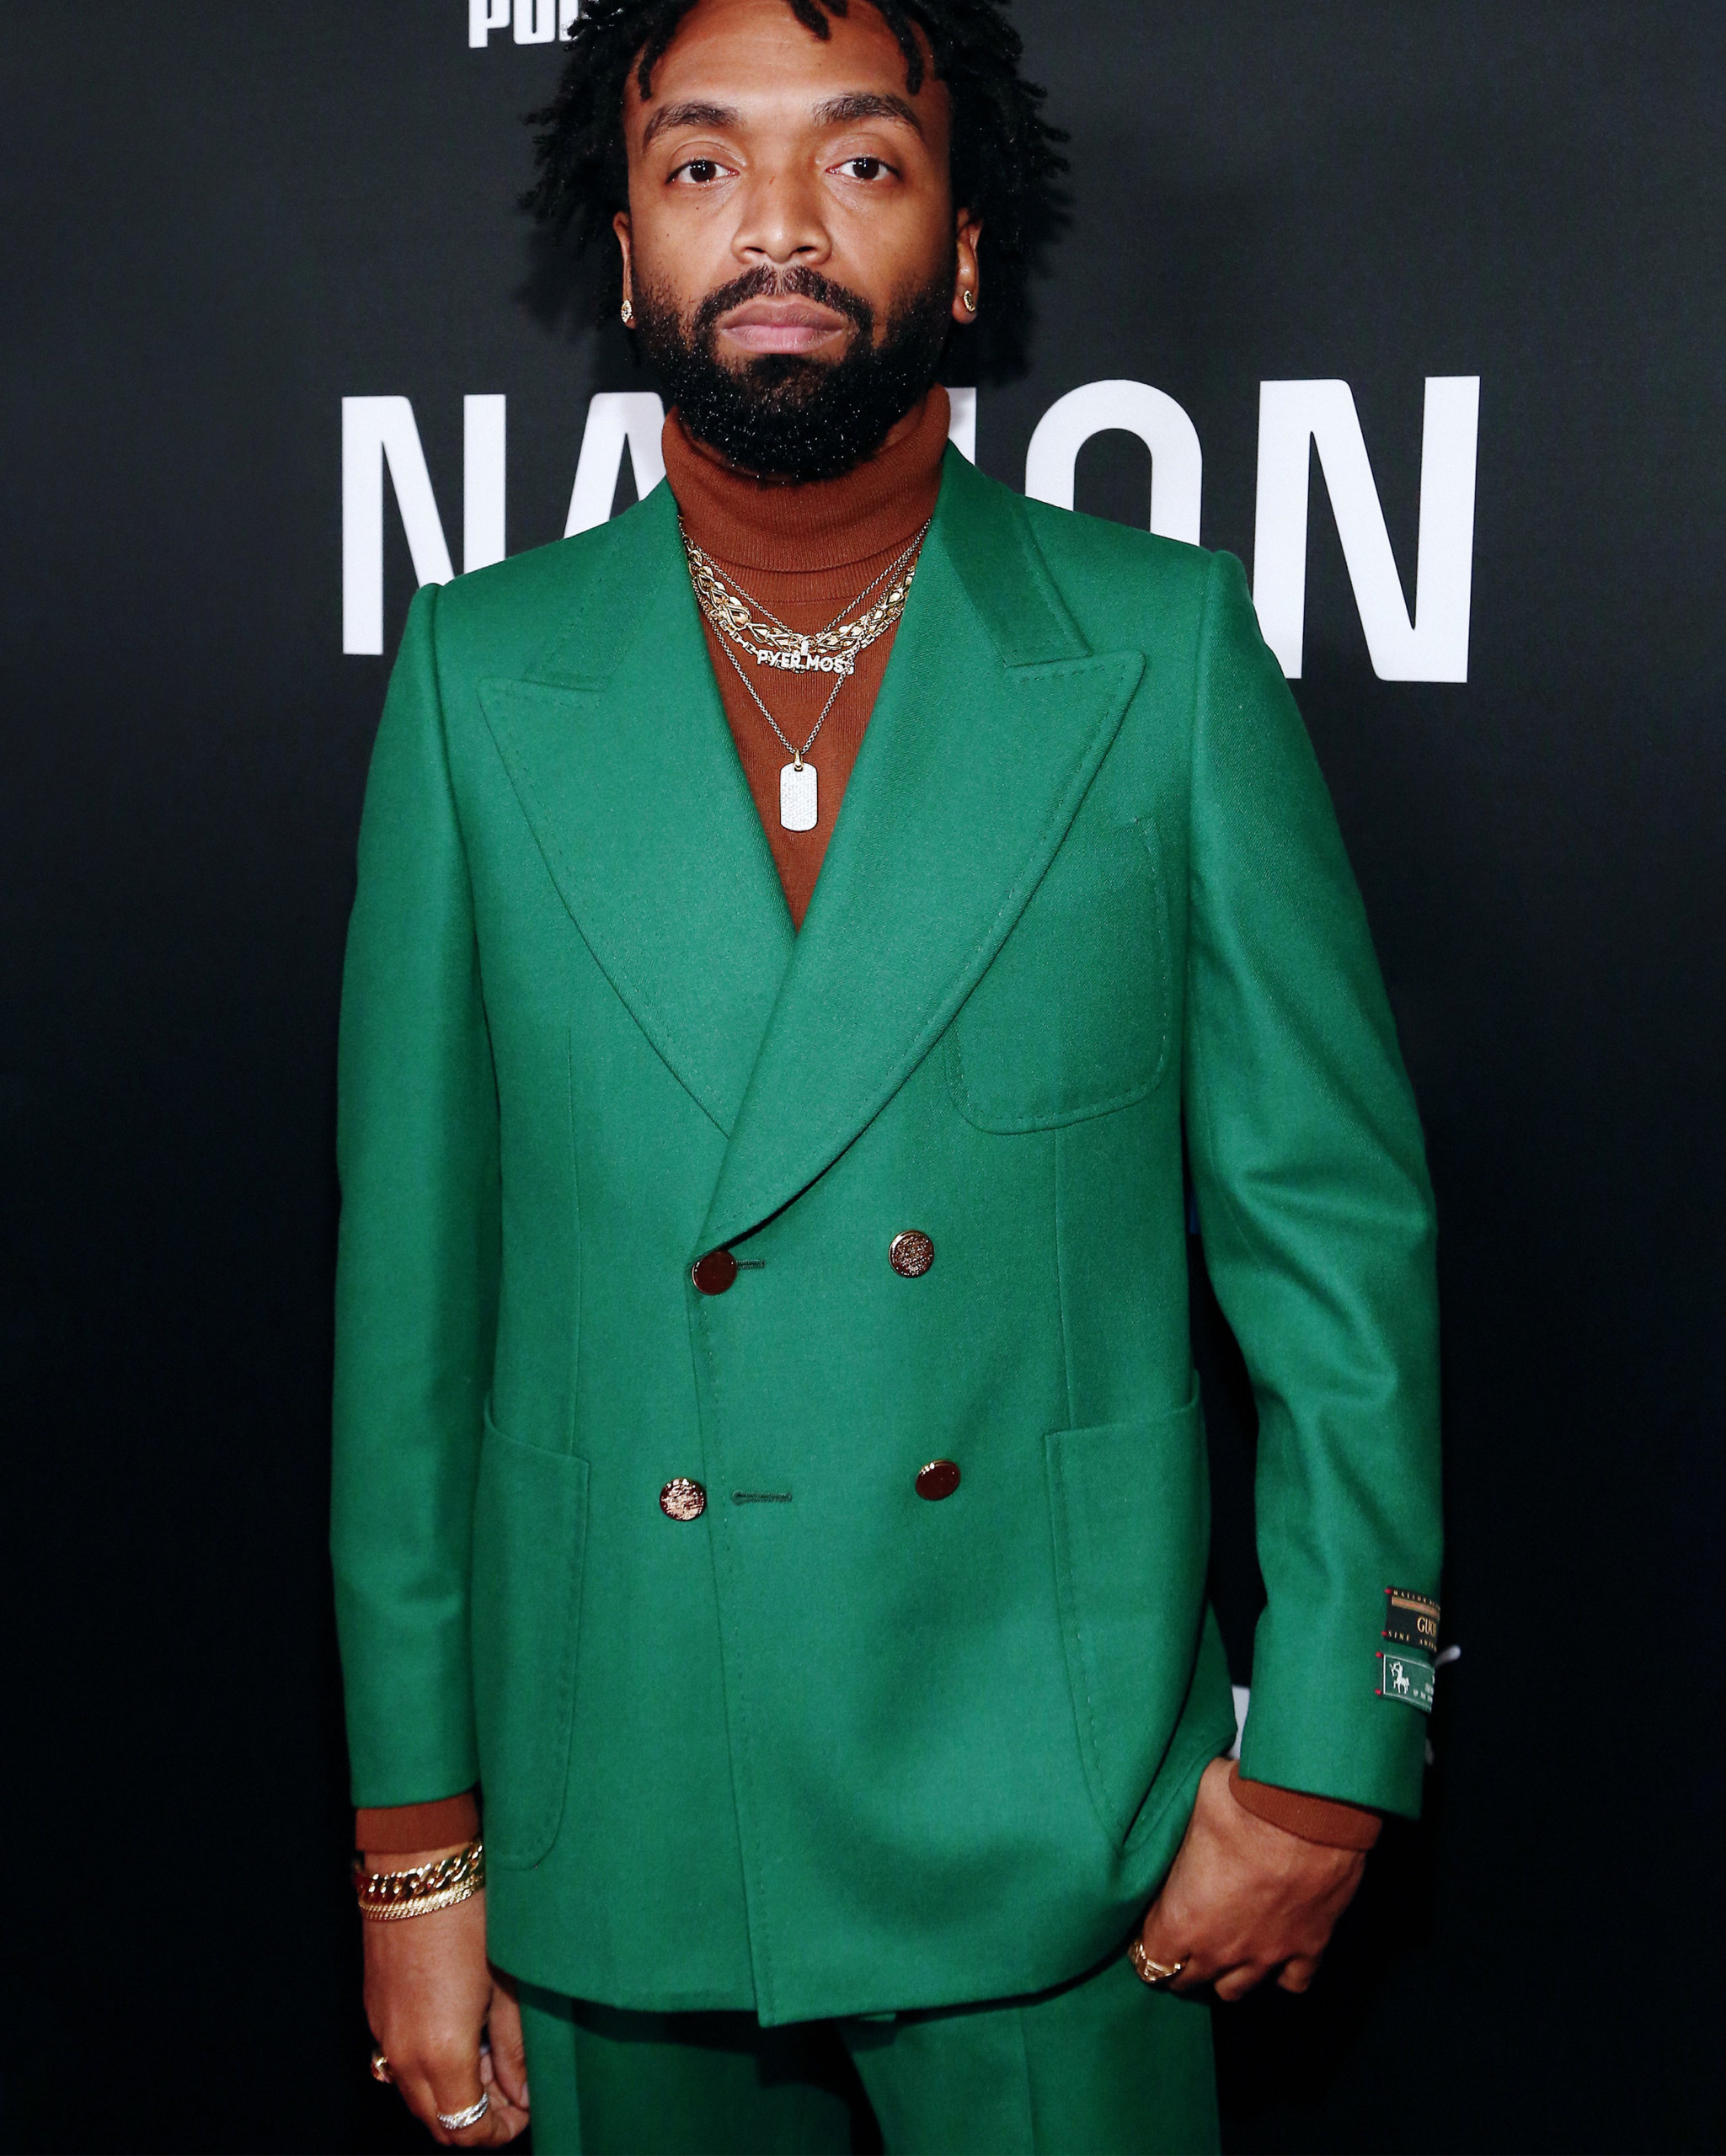 Kerby Jean-Raymond at the 2020 Roc Nation Brunch wearing a kelly green suit and a selection of retro jewelry including a set of gold chain necklaces and custom diamond stud earrings from Shelley & Co